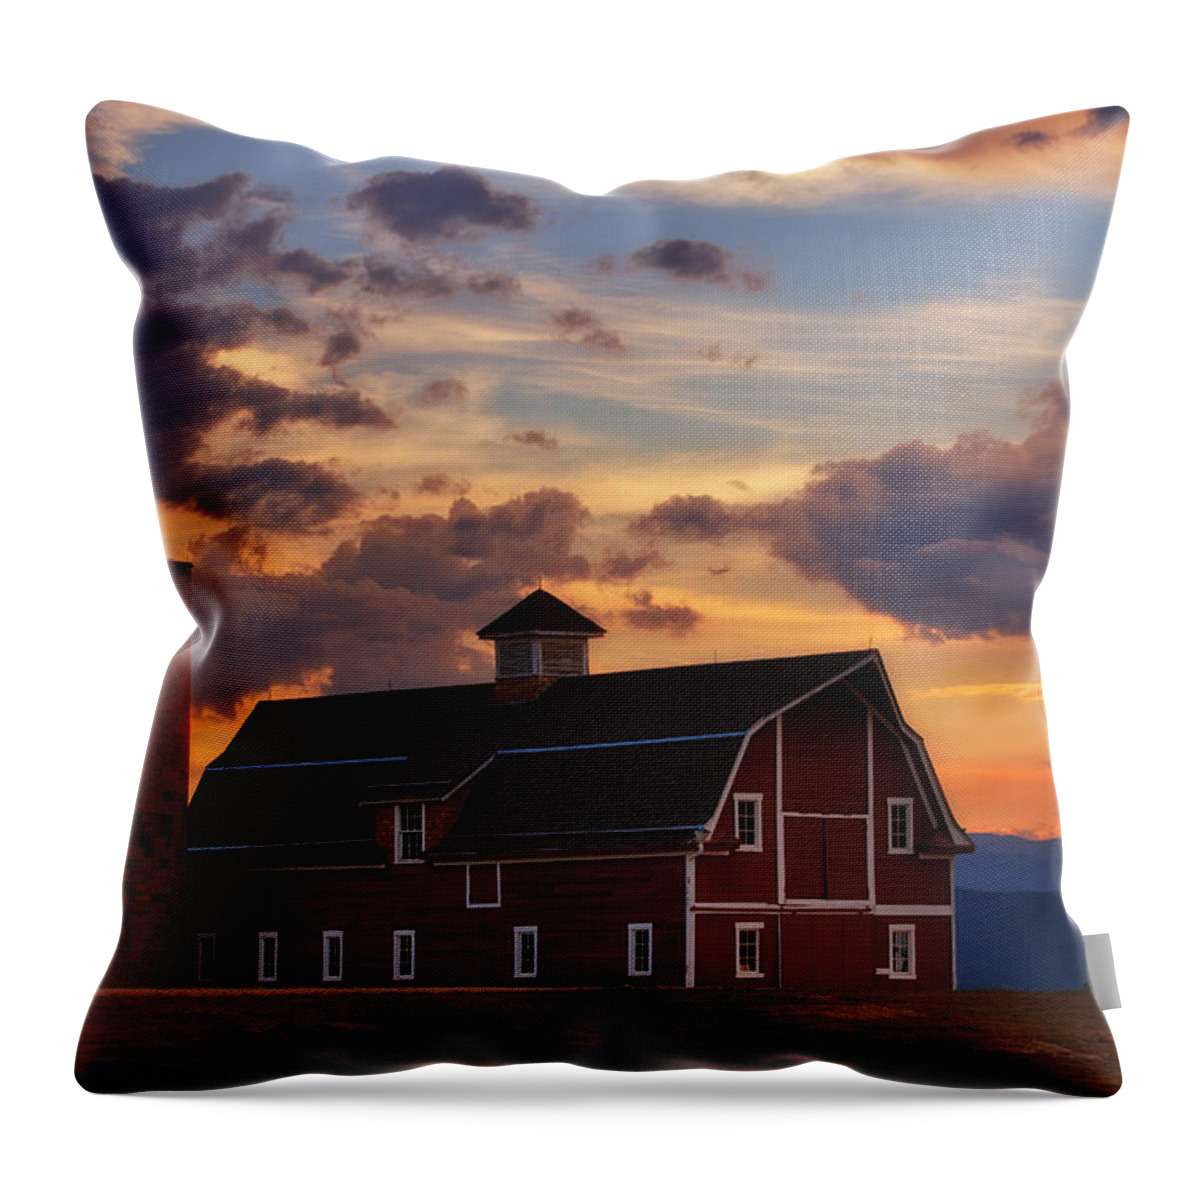 Barn Throw Pillow featuring the photograph Danny's Barn by Darren White